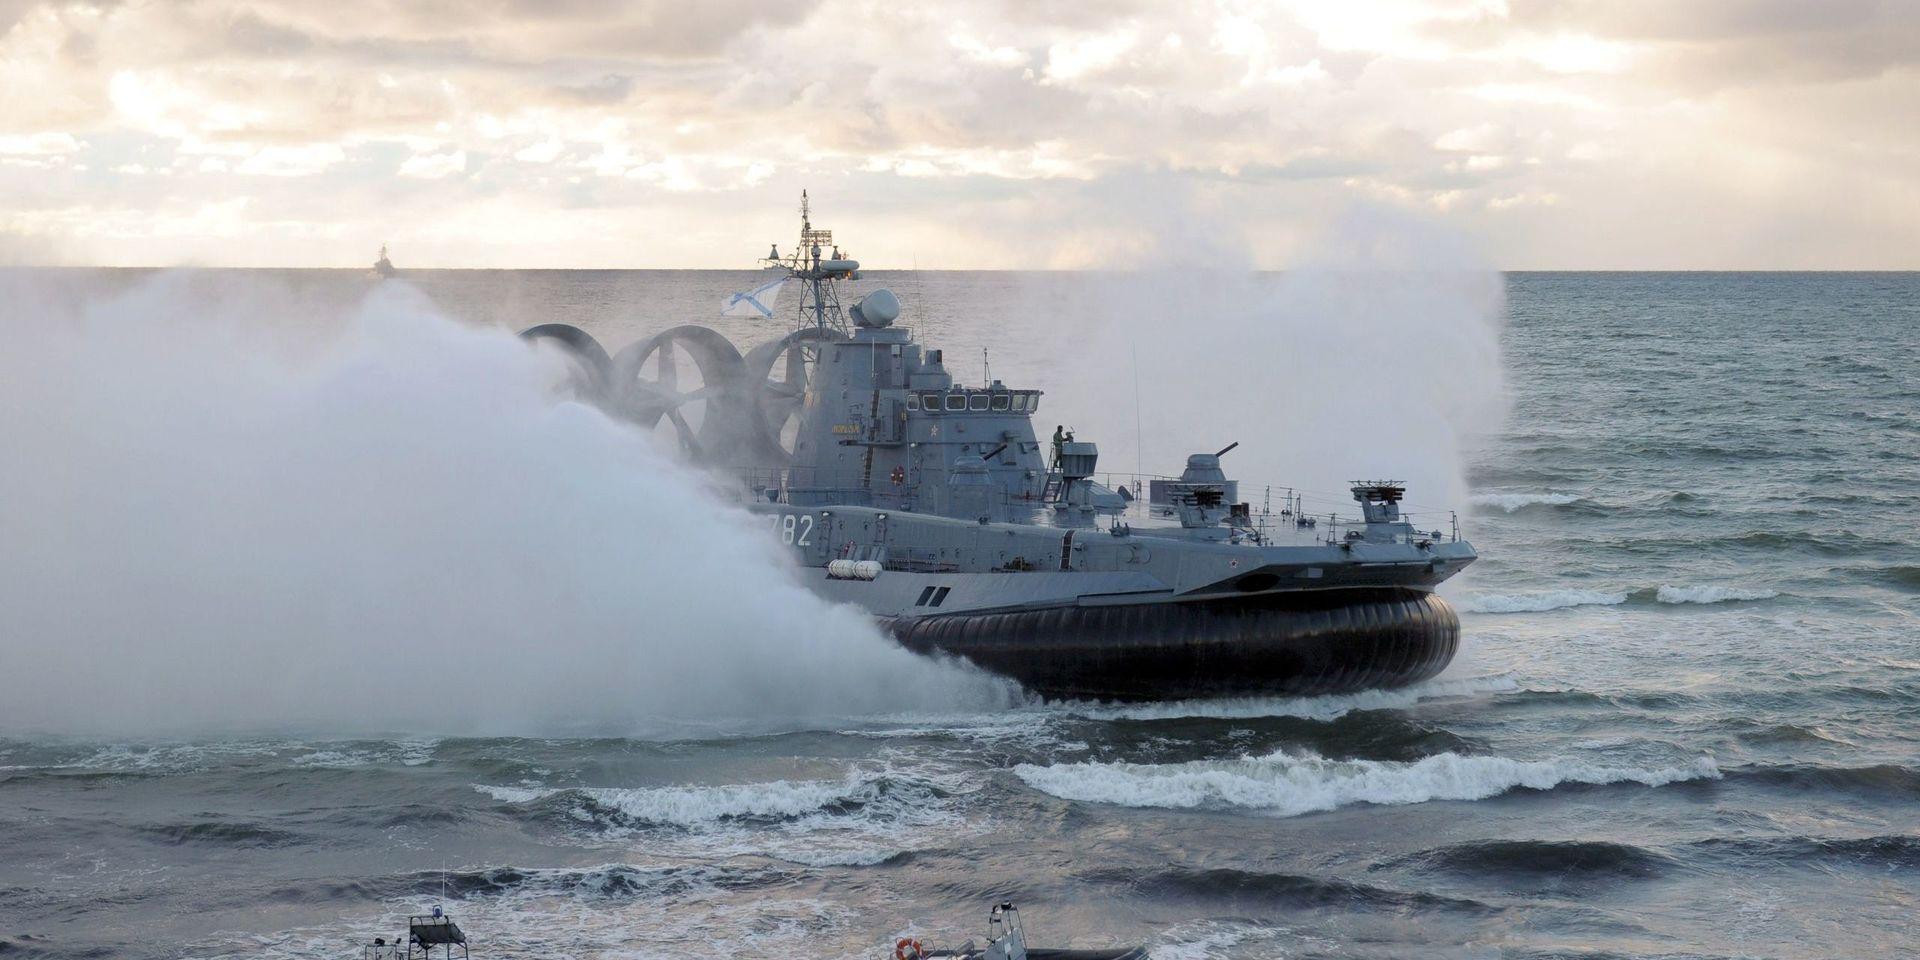 A military hovercraft approaches shore during the Russian-Belarusian West-2013 joint war games at the Khmelevka shooting range in Kaliningrad region, western Russia, Thursday, Sept. 26, 2013. Russian President Vladimir Putin and Belarusian President Alexander Lukashenko watched the joint war games on Thursday. (AP Photo/RIA-Novosti, Alexei Druzhinin, Presidential Press Service)